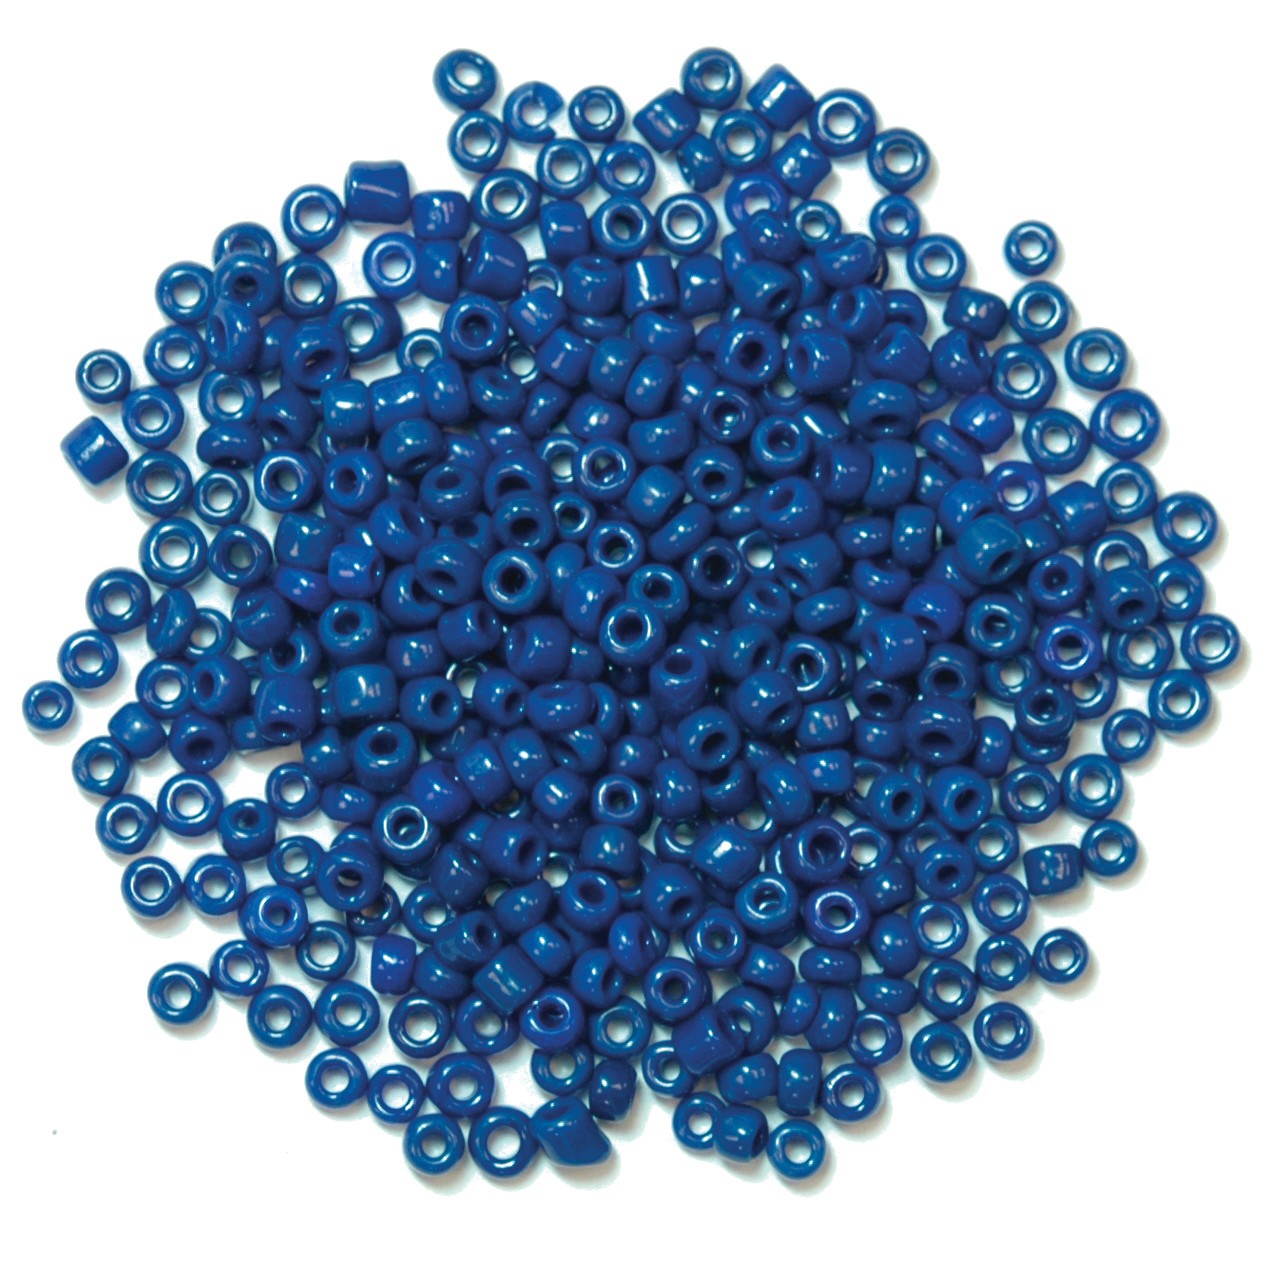 Trimits Royal Seed Beads - 8g Pack